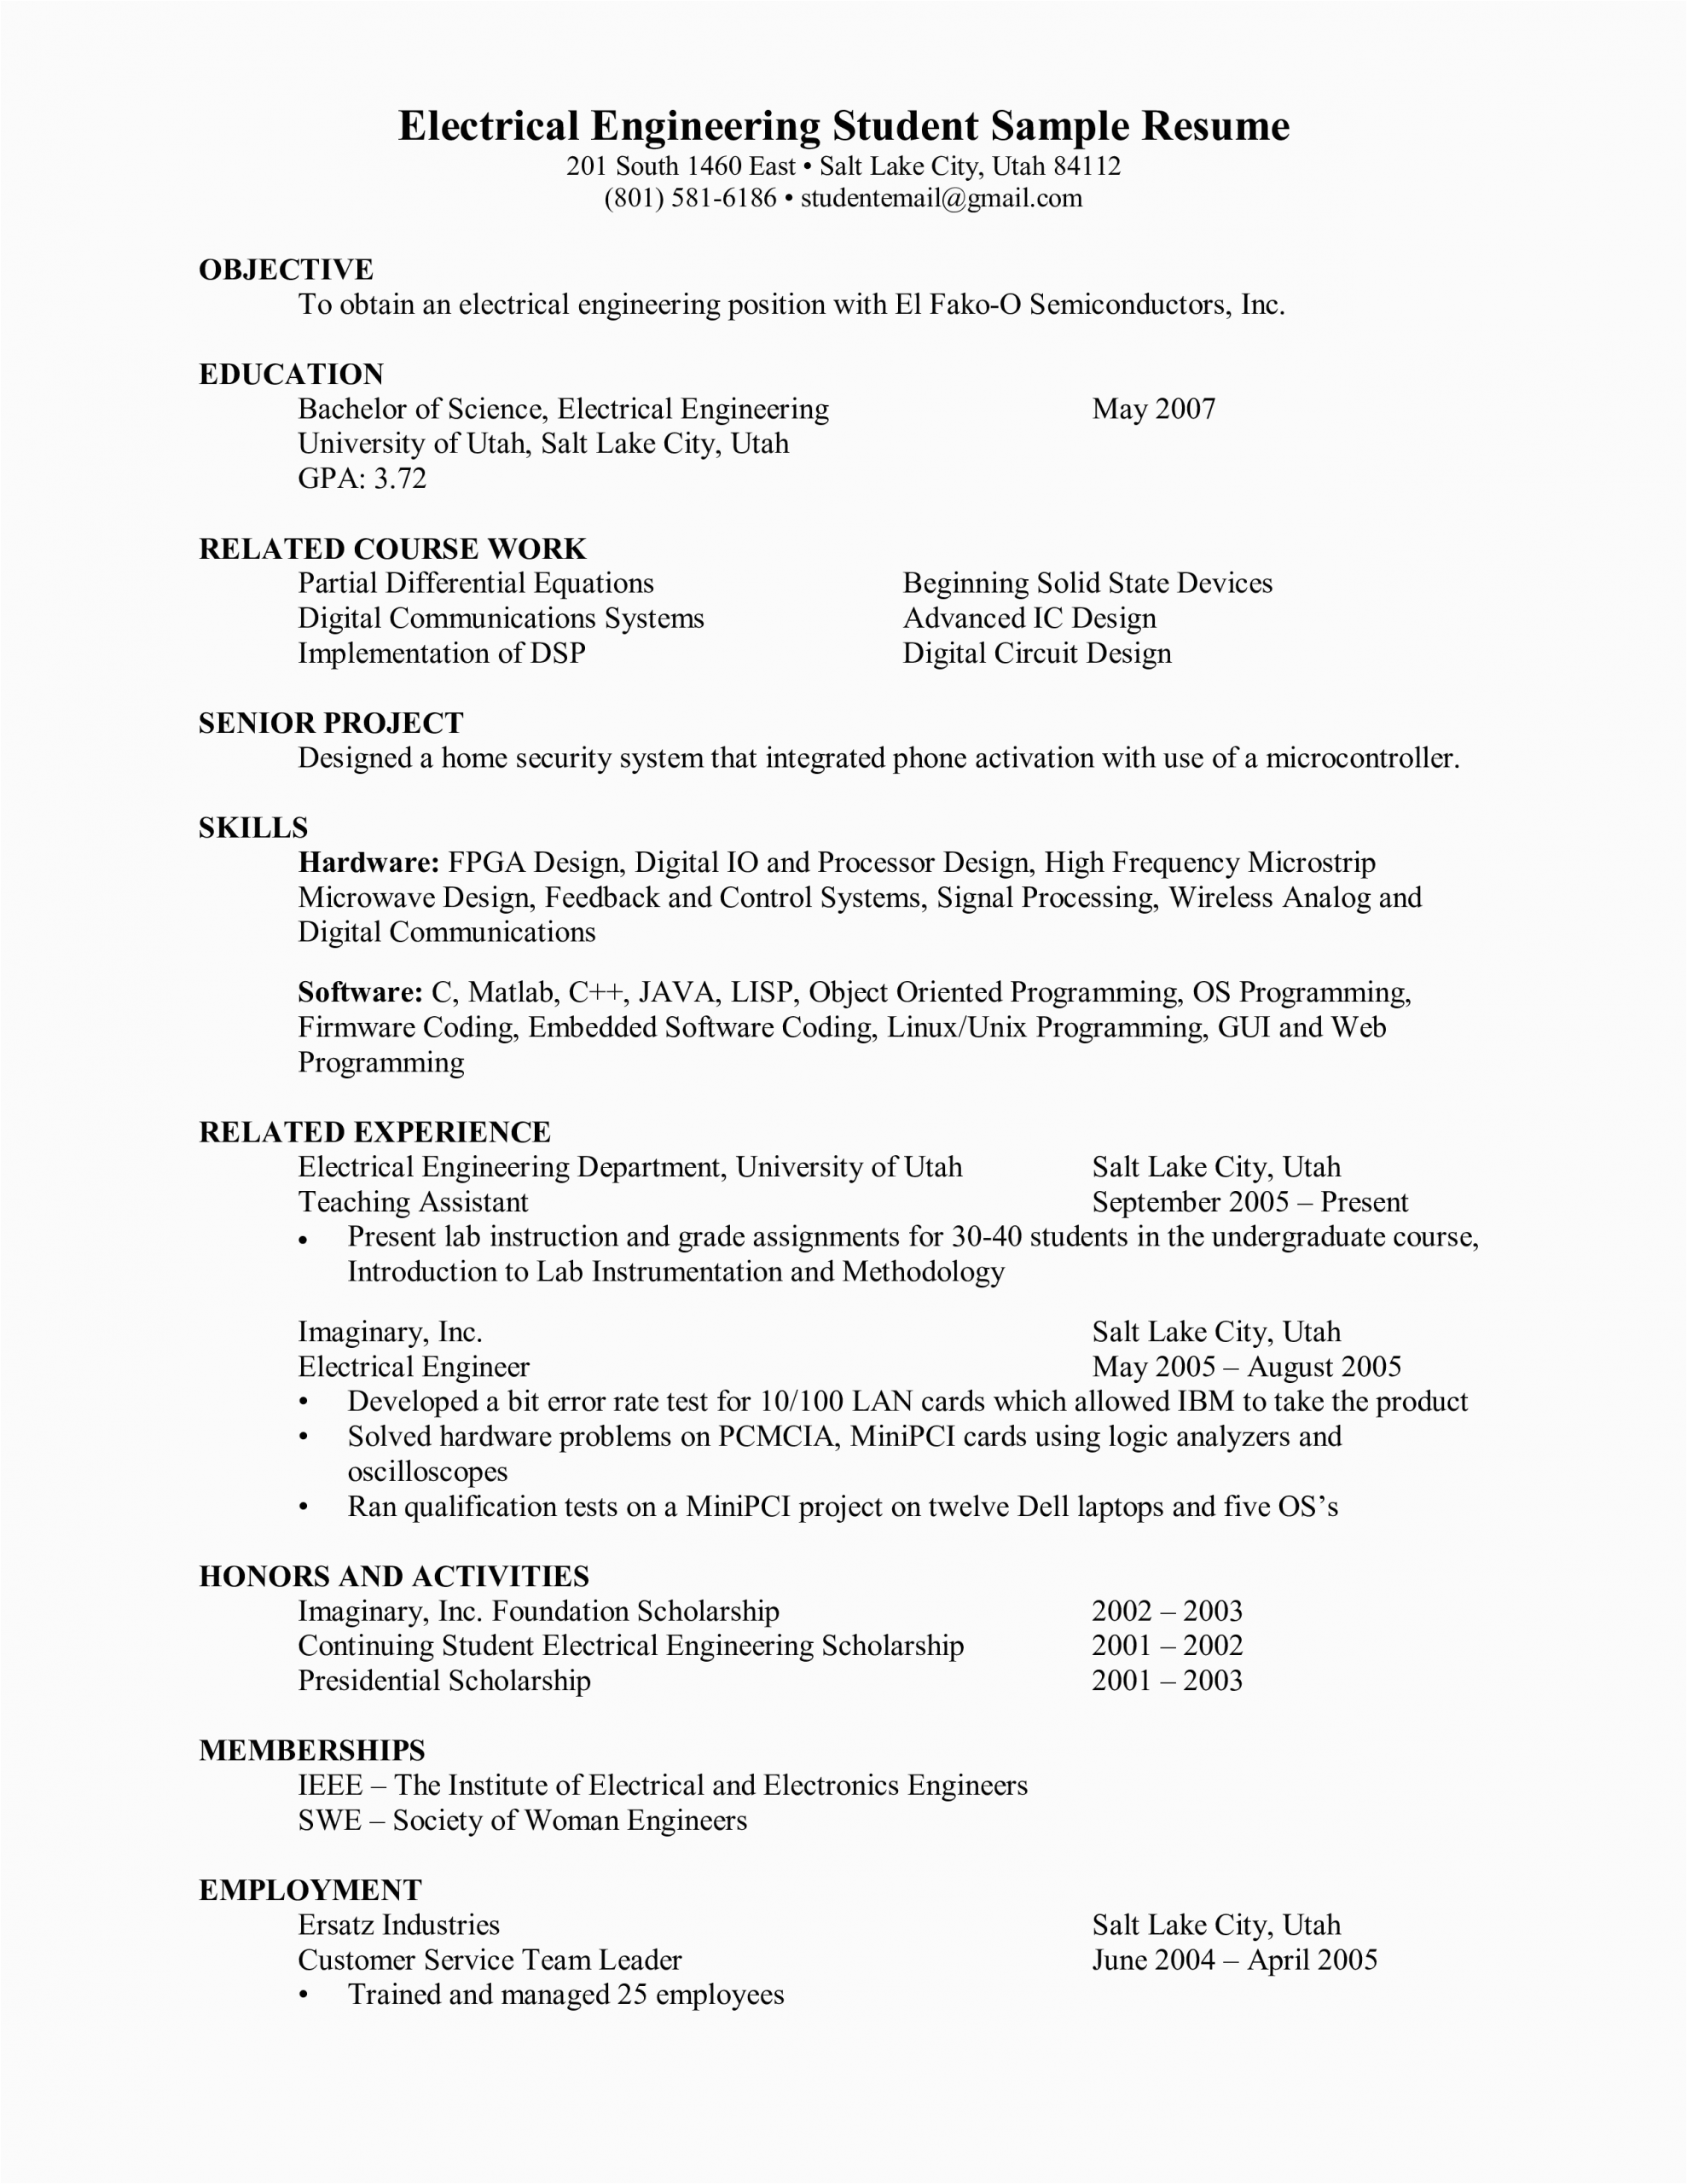 Electrical and Electronics Engineering Fresher Resume Sample Electrical Engineer Fresher Resume Sample